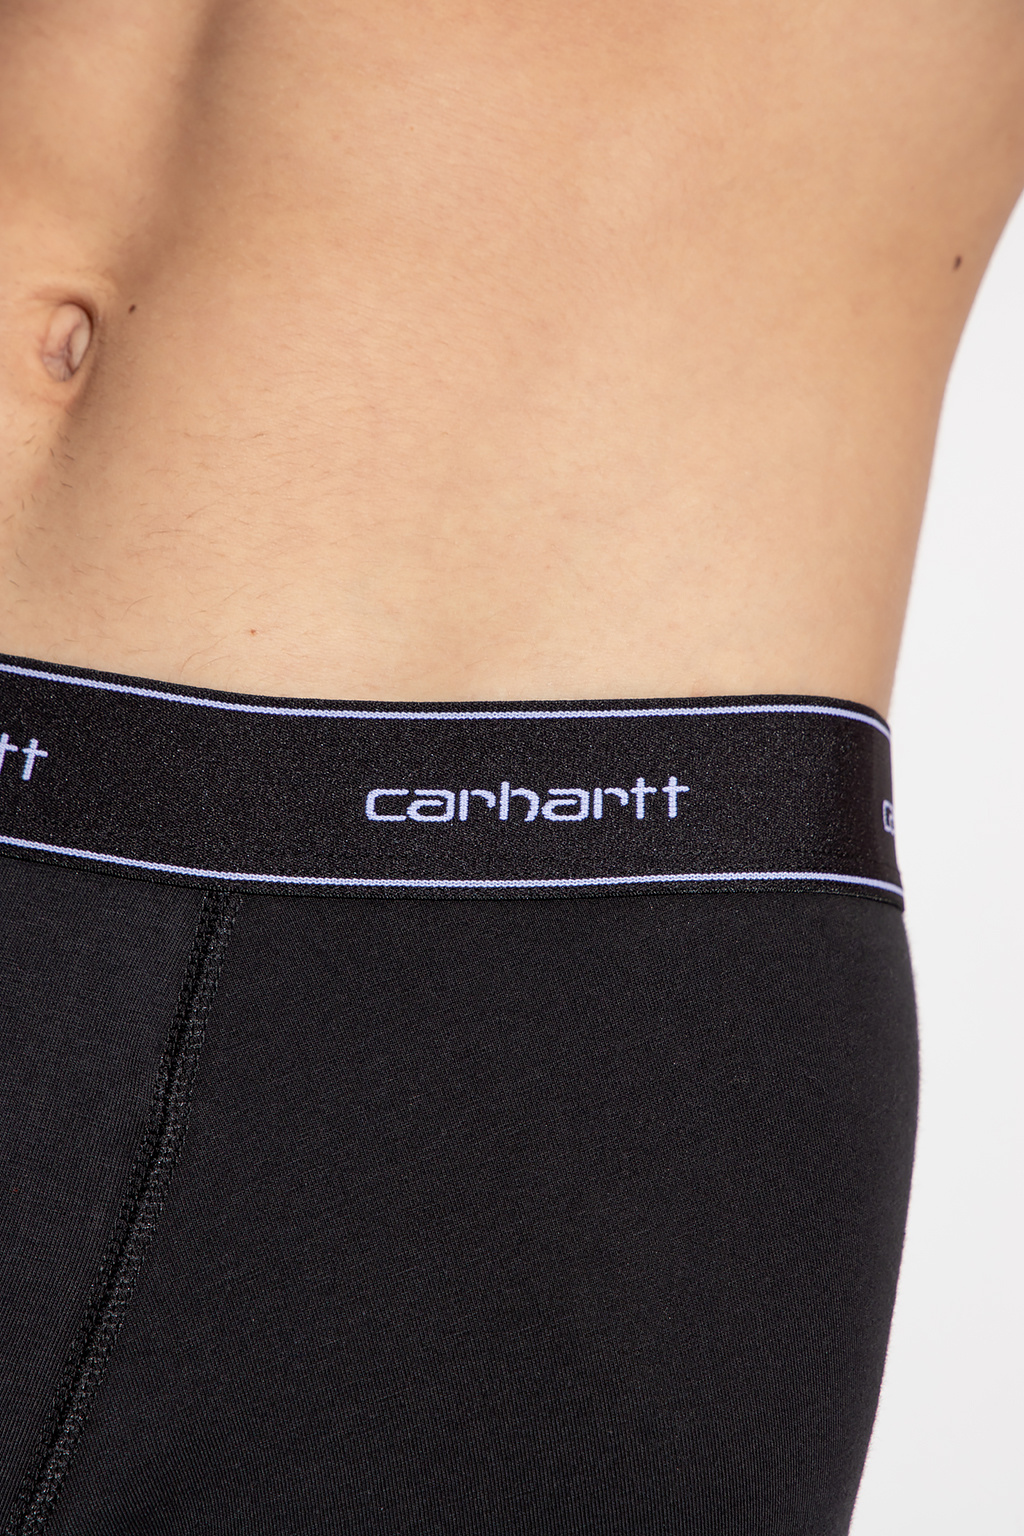 Carhartt WIP Branded boxers two-pack, Men's Clothing